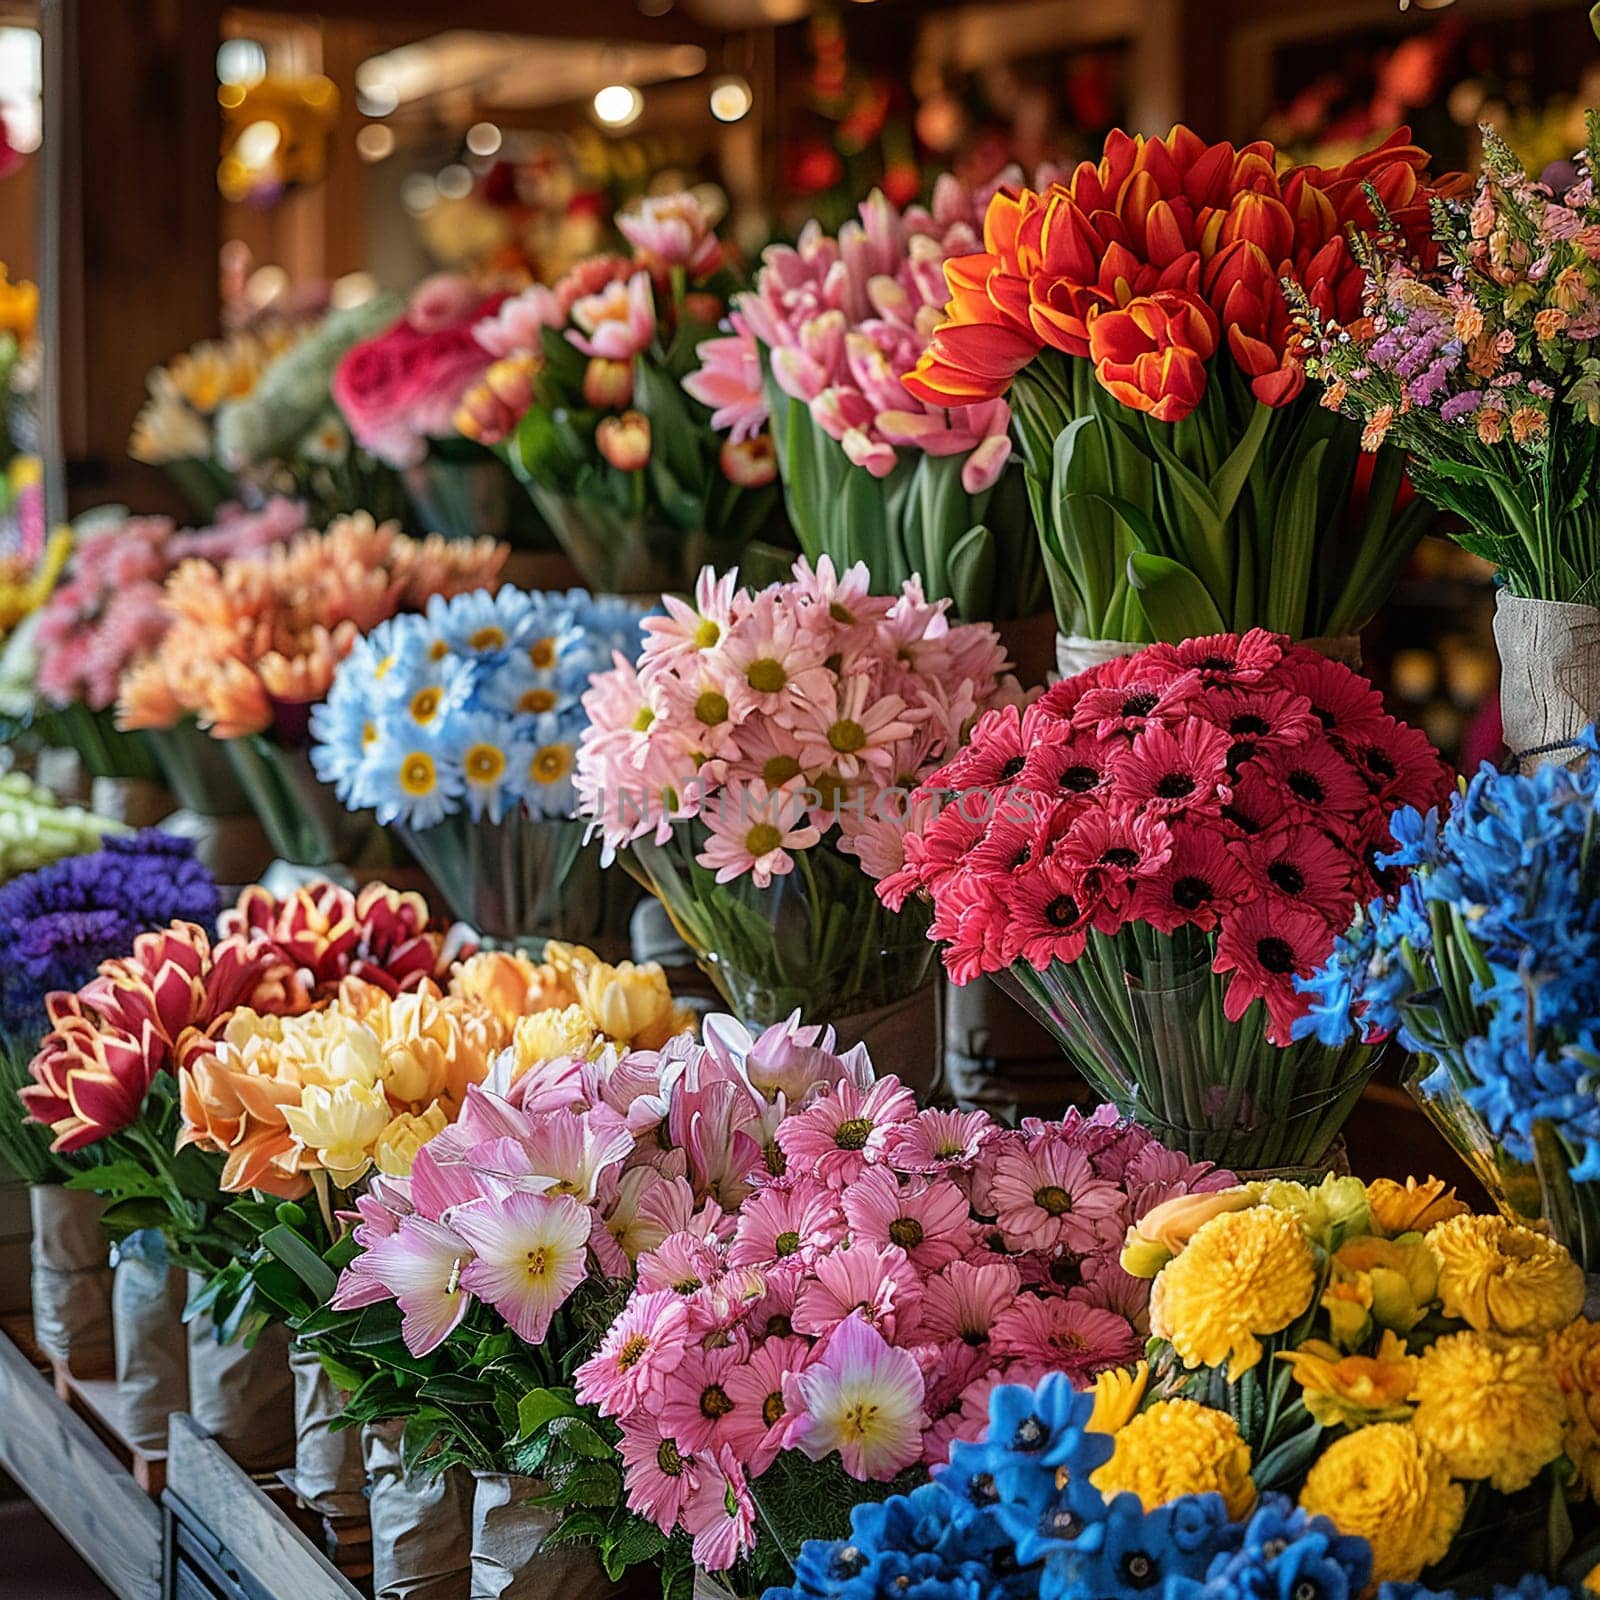 Cheerful Flower Shop Bursting with Colorful Arrangements for Sale, The soft focus on blooms suggests the fragrance and beauty of floral artistry.